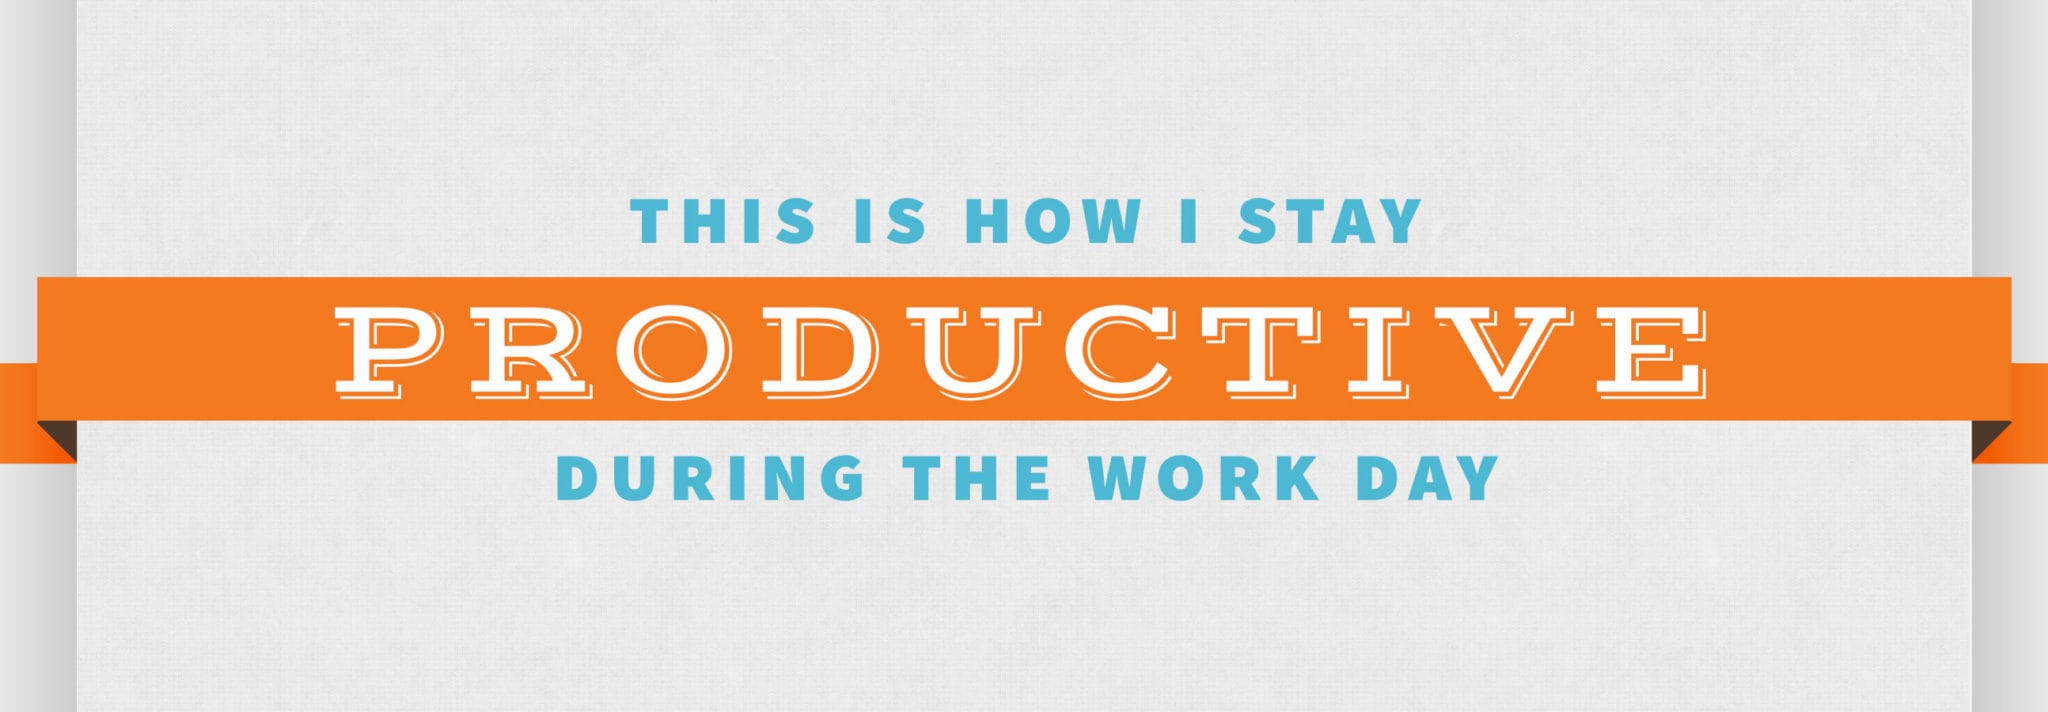 How To Stay Productive During The Work Day